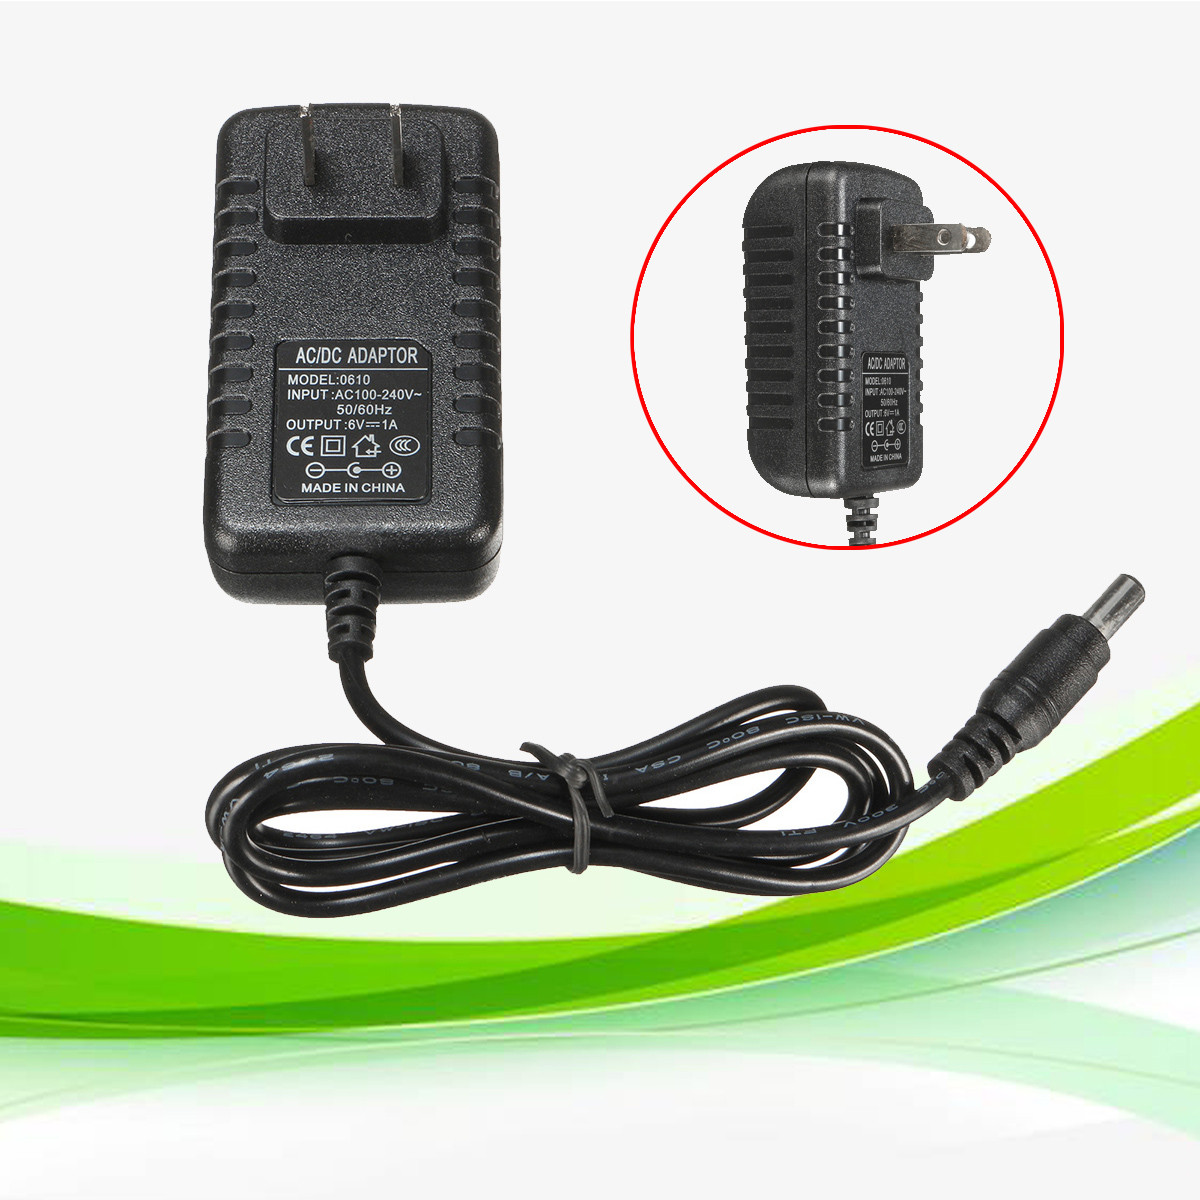 6V 1A AC/DC Adapter Battery Charger Power Supply Transformer Mains UK Plug HOT!